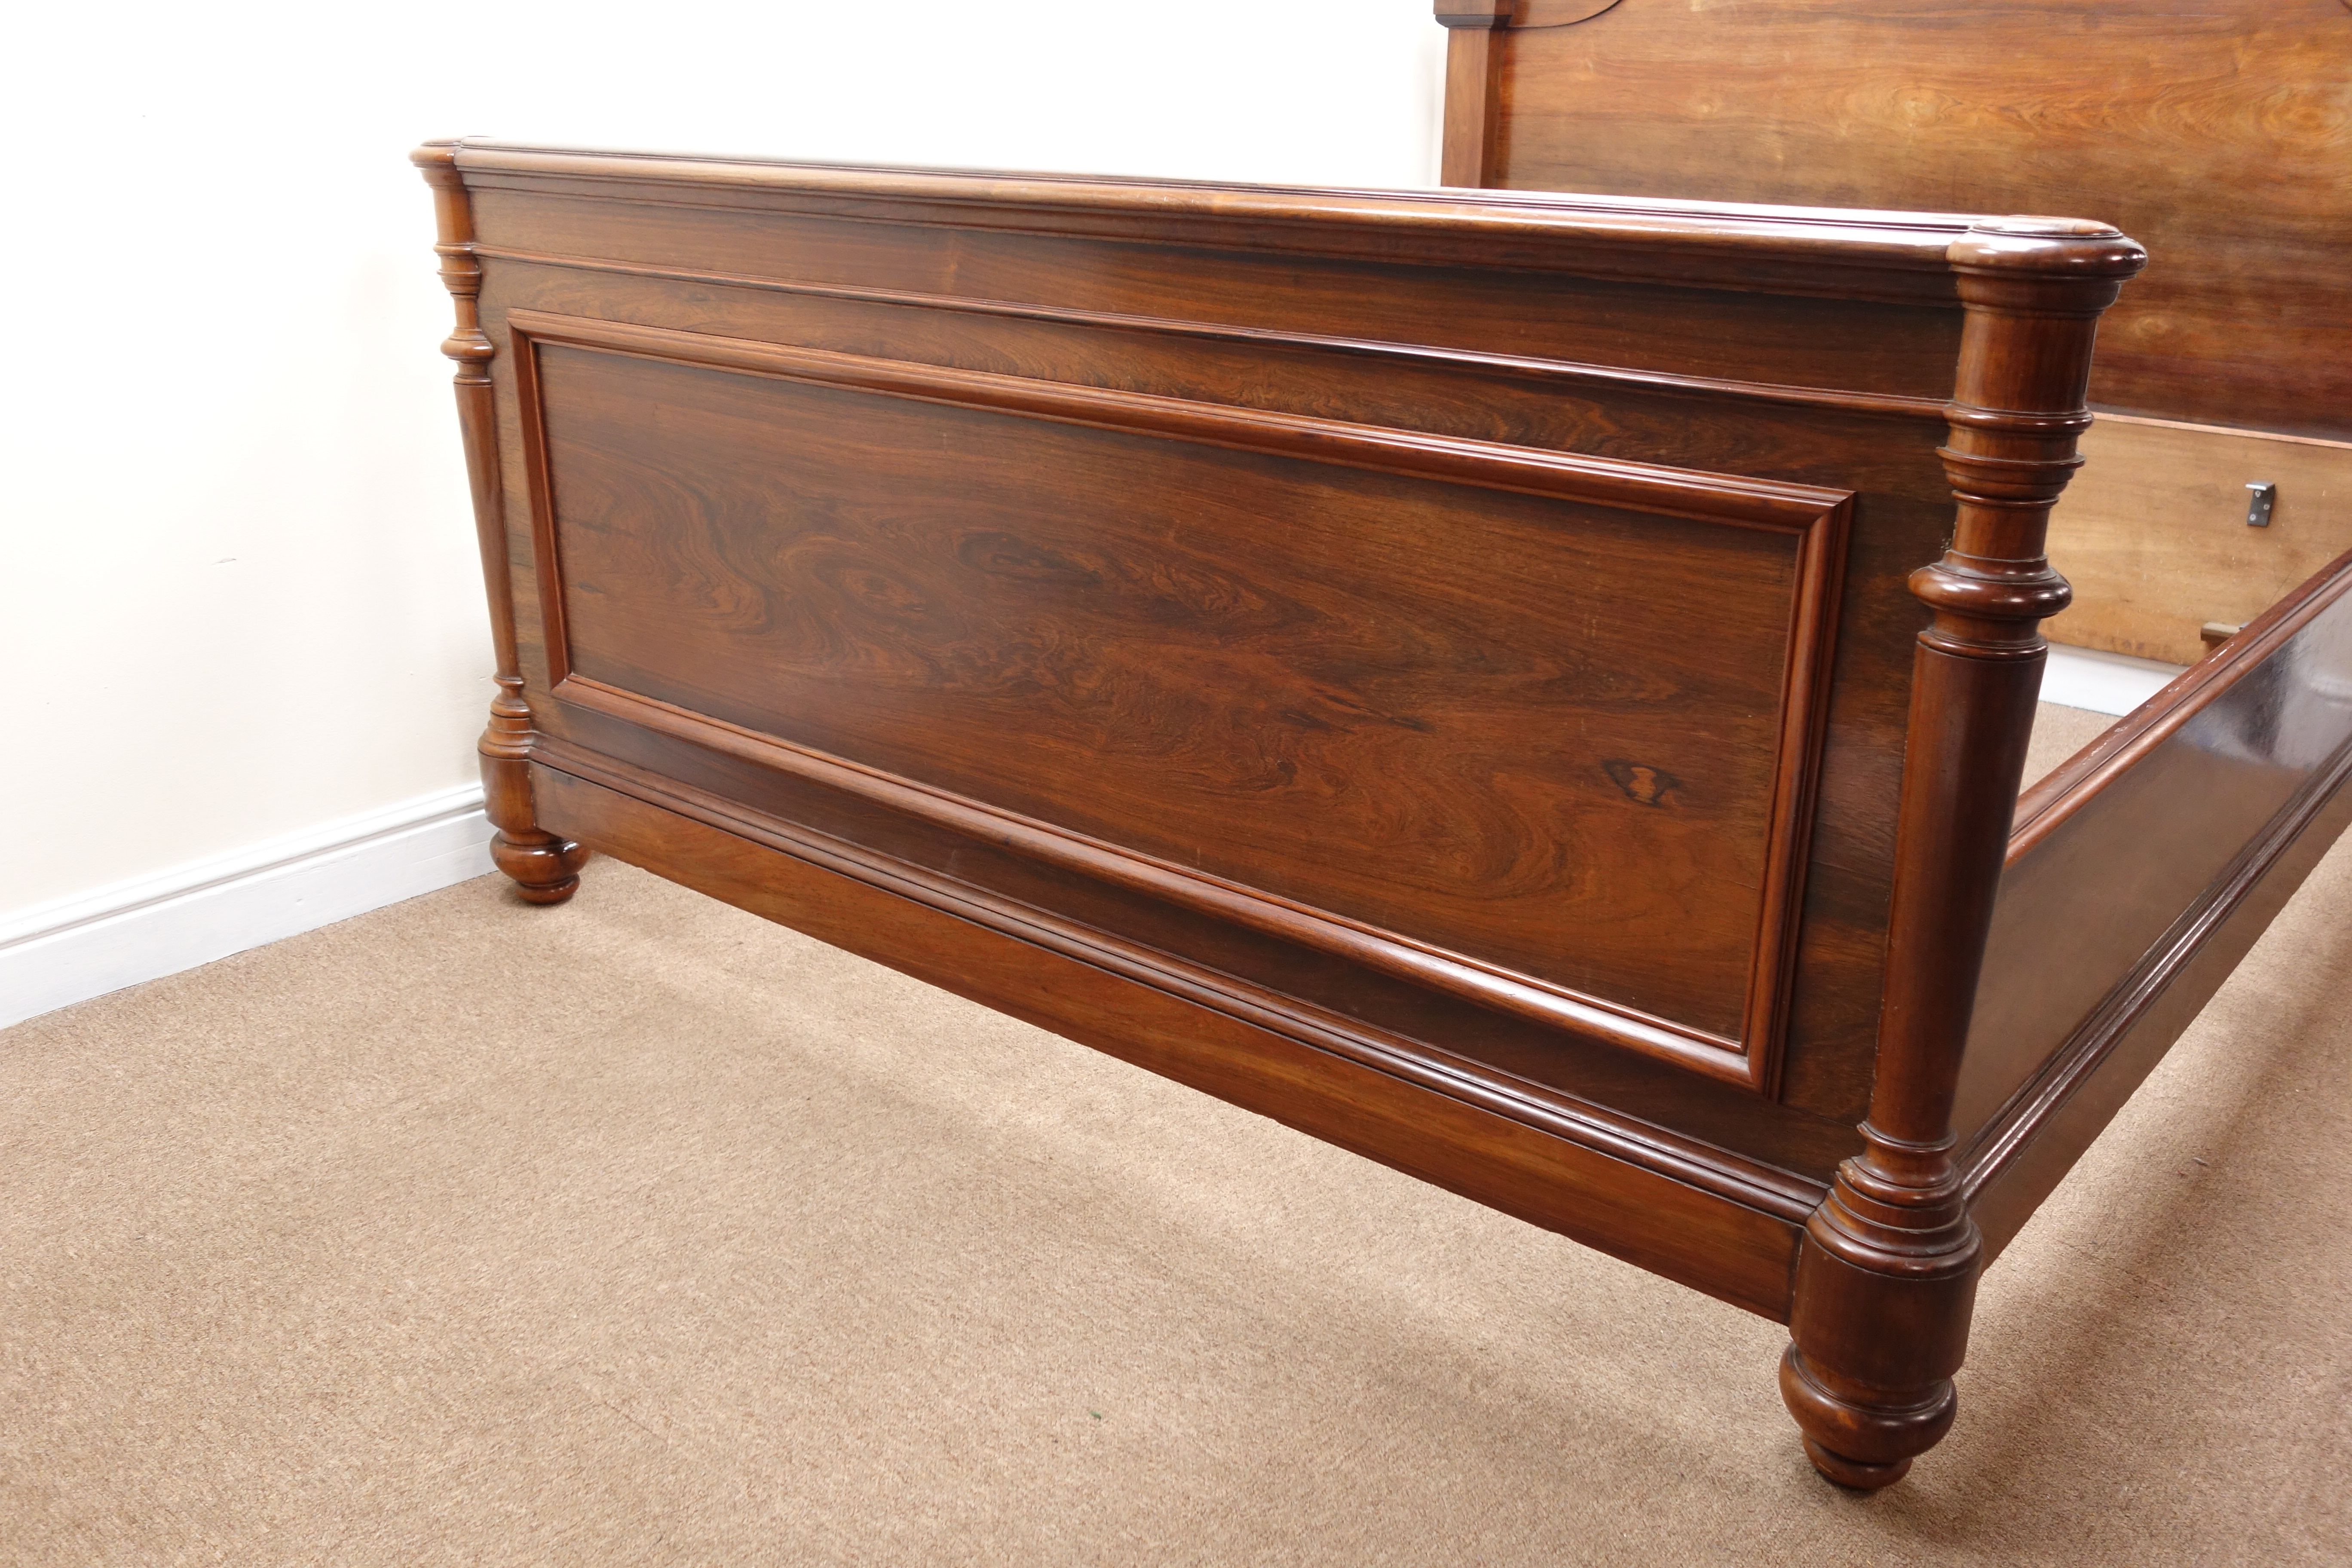 19th century French rosewood double bed stead, the stepped arched headboard with lobed finials, - Image 4 of 9